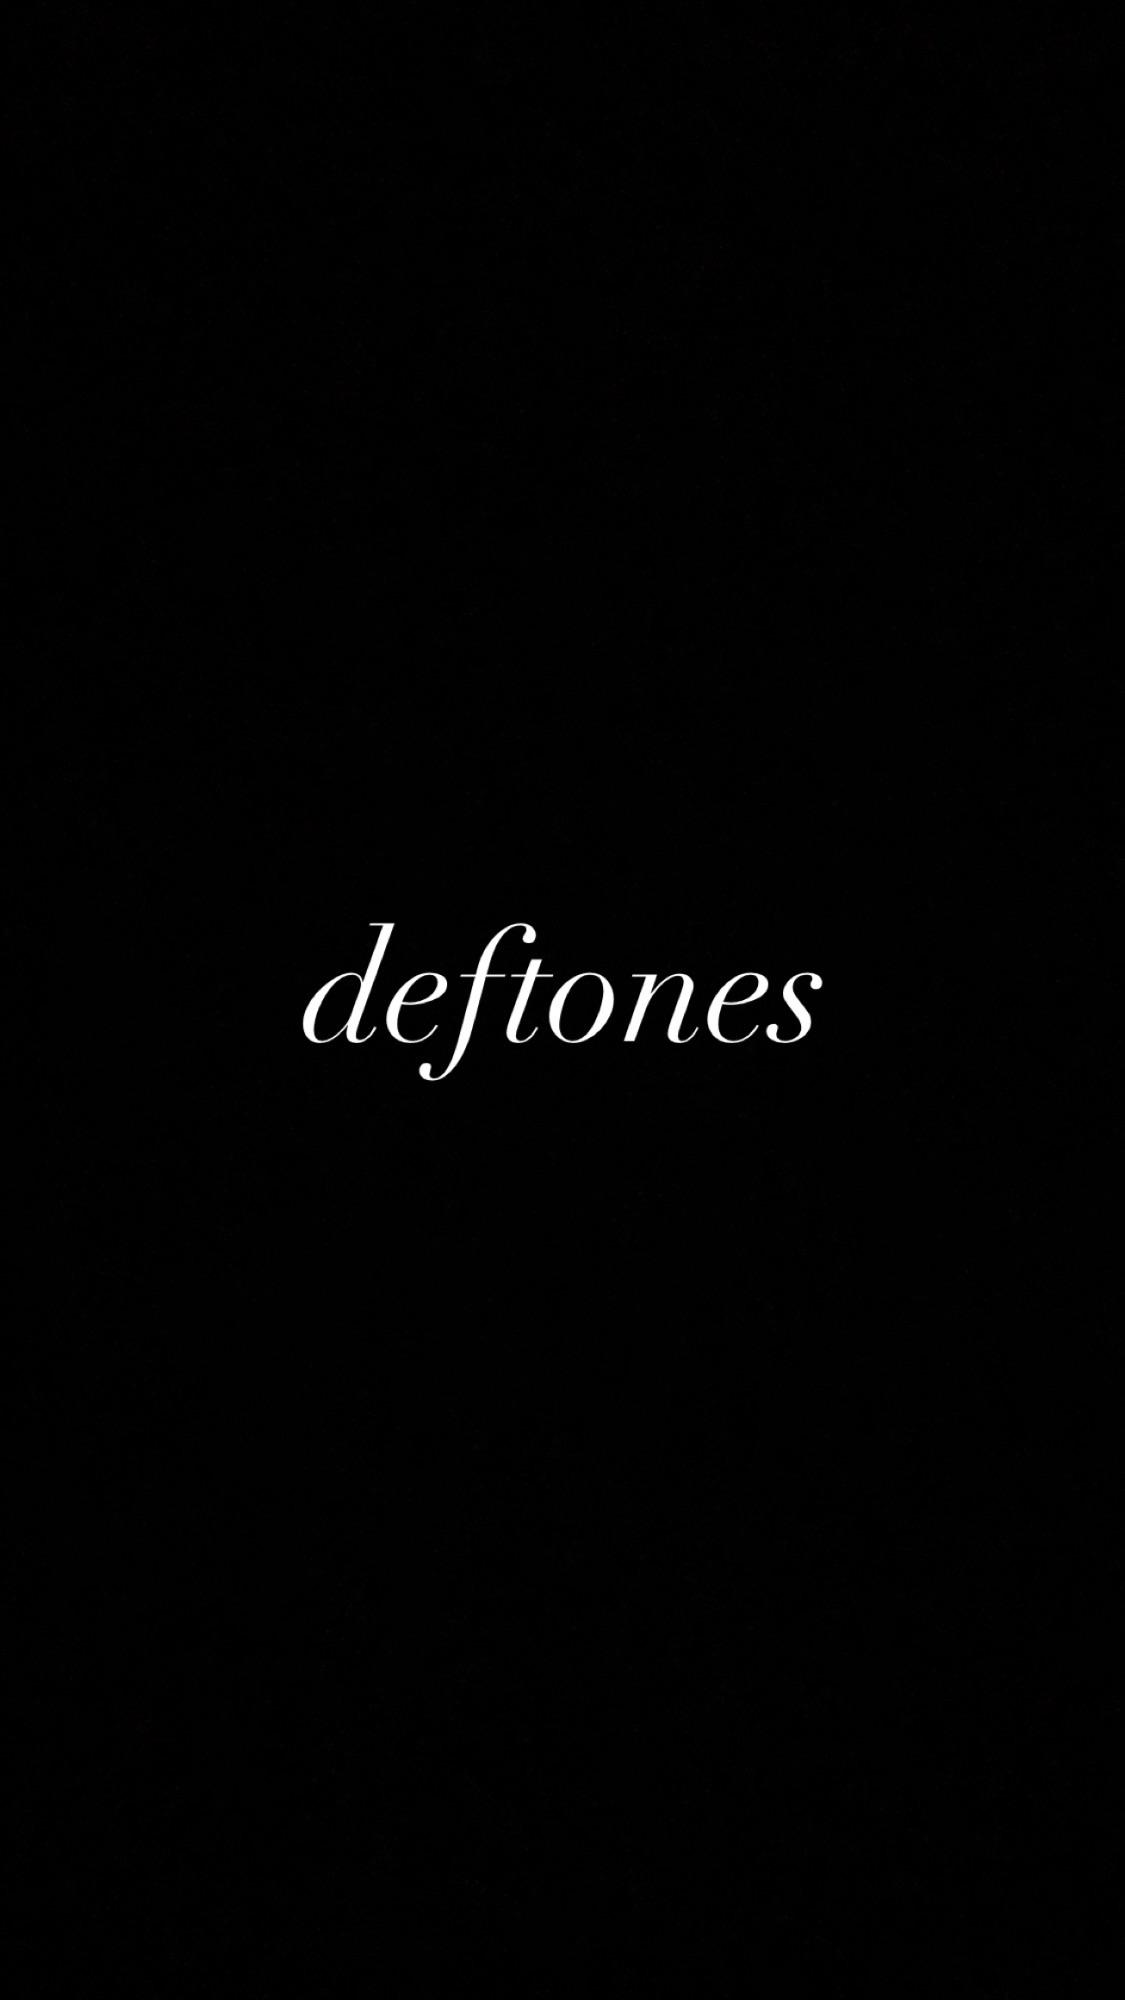 Heres a simple wallpaper background for anyone interested used a font with a deftones vibe to it rdeftones